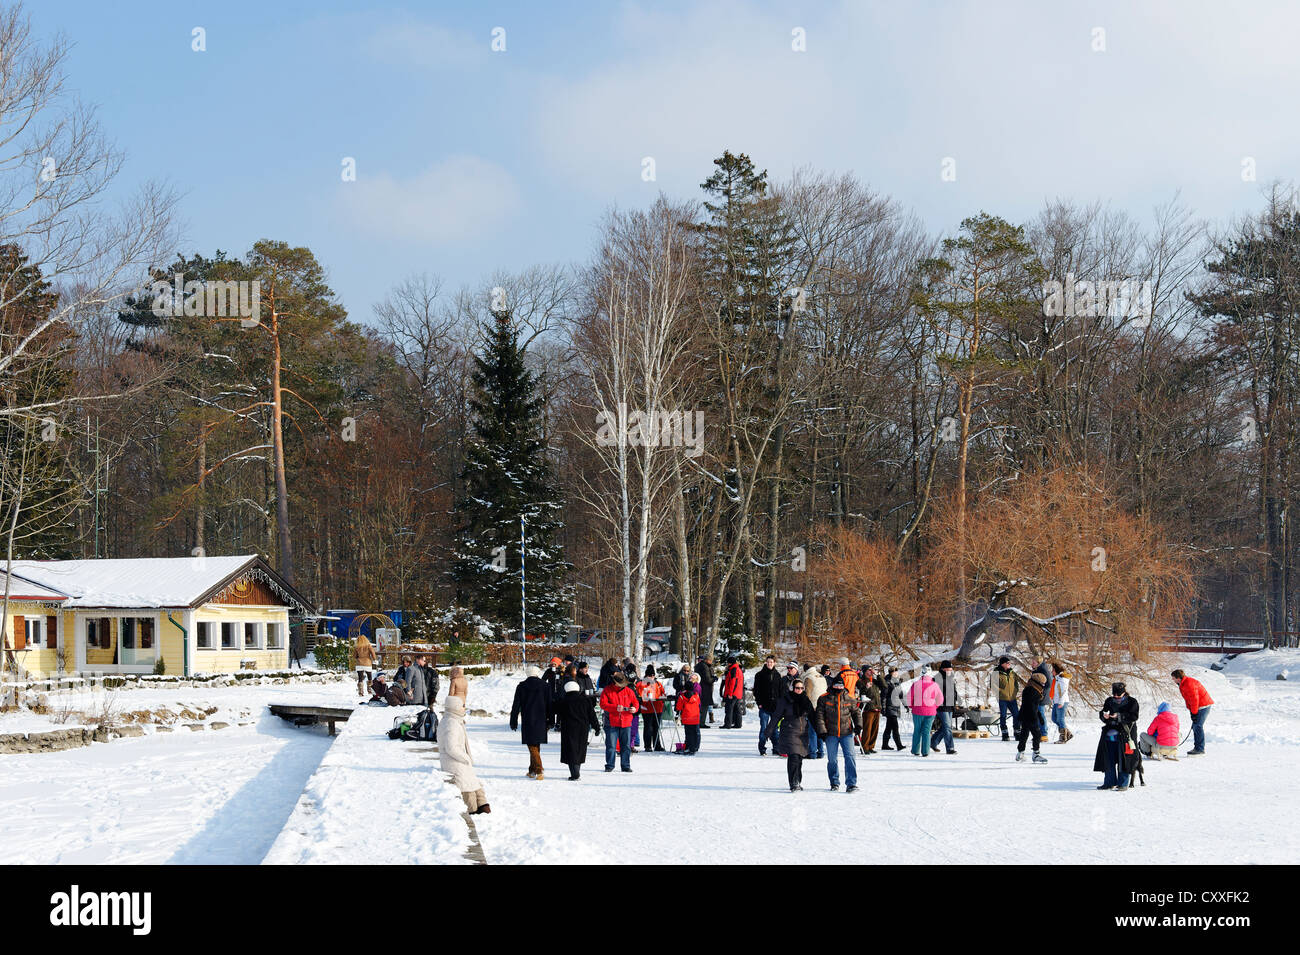 Ice skaters and hikers at the little house on the lake, kleines Seehaus, in Winter, near St. Heinrich, Lake Starnberg Stock Photo